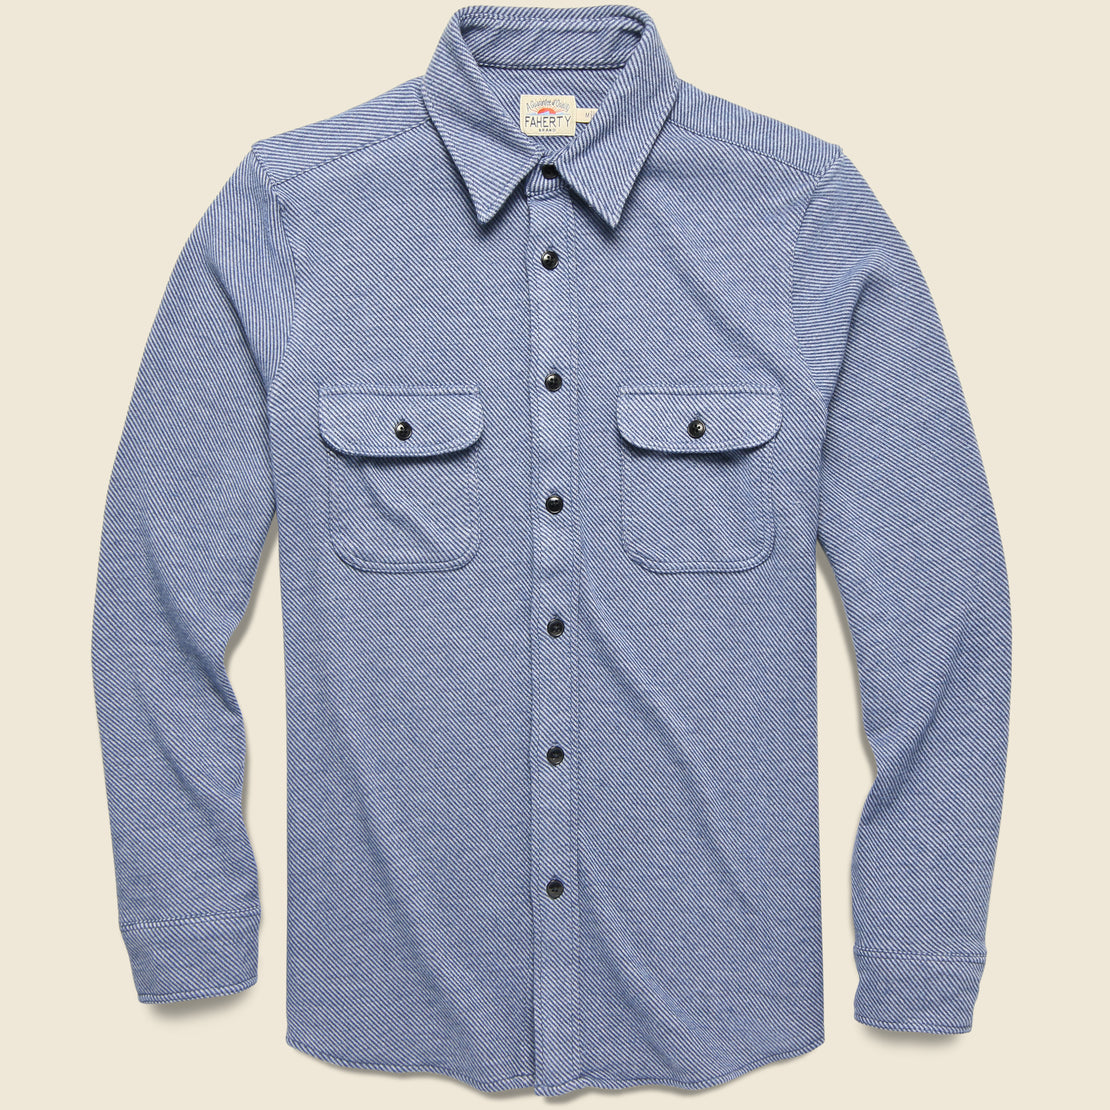 Faherty Legend Sweater Shirt - Washed Blue